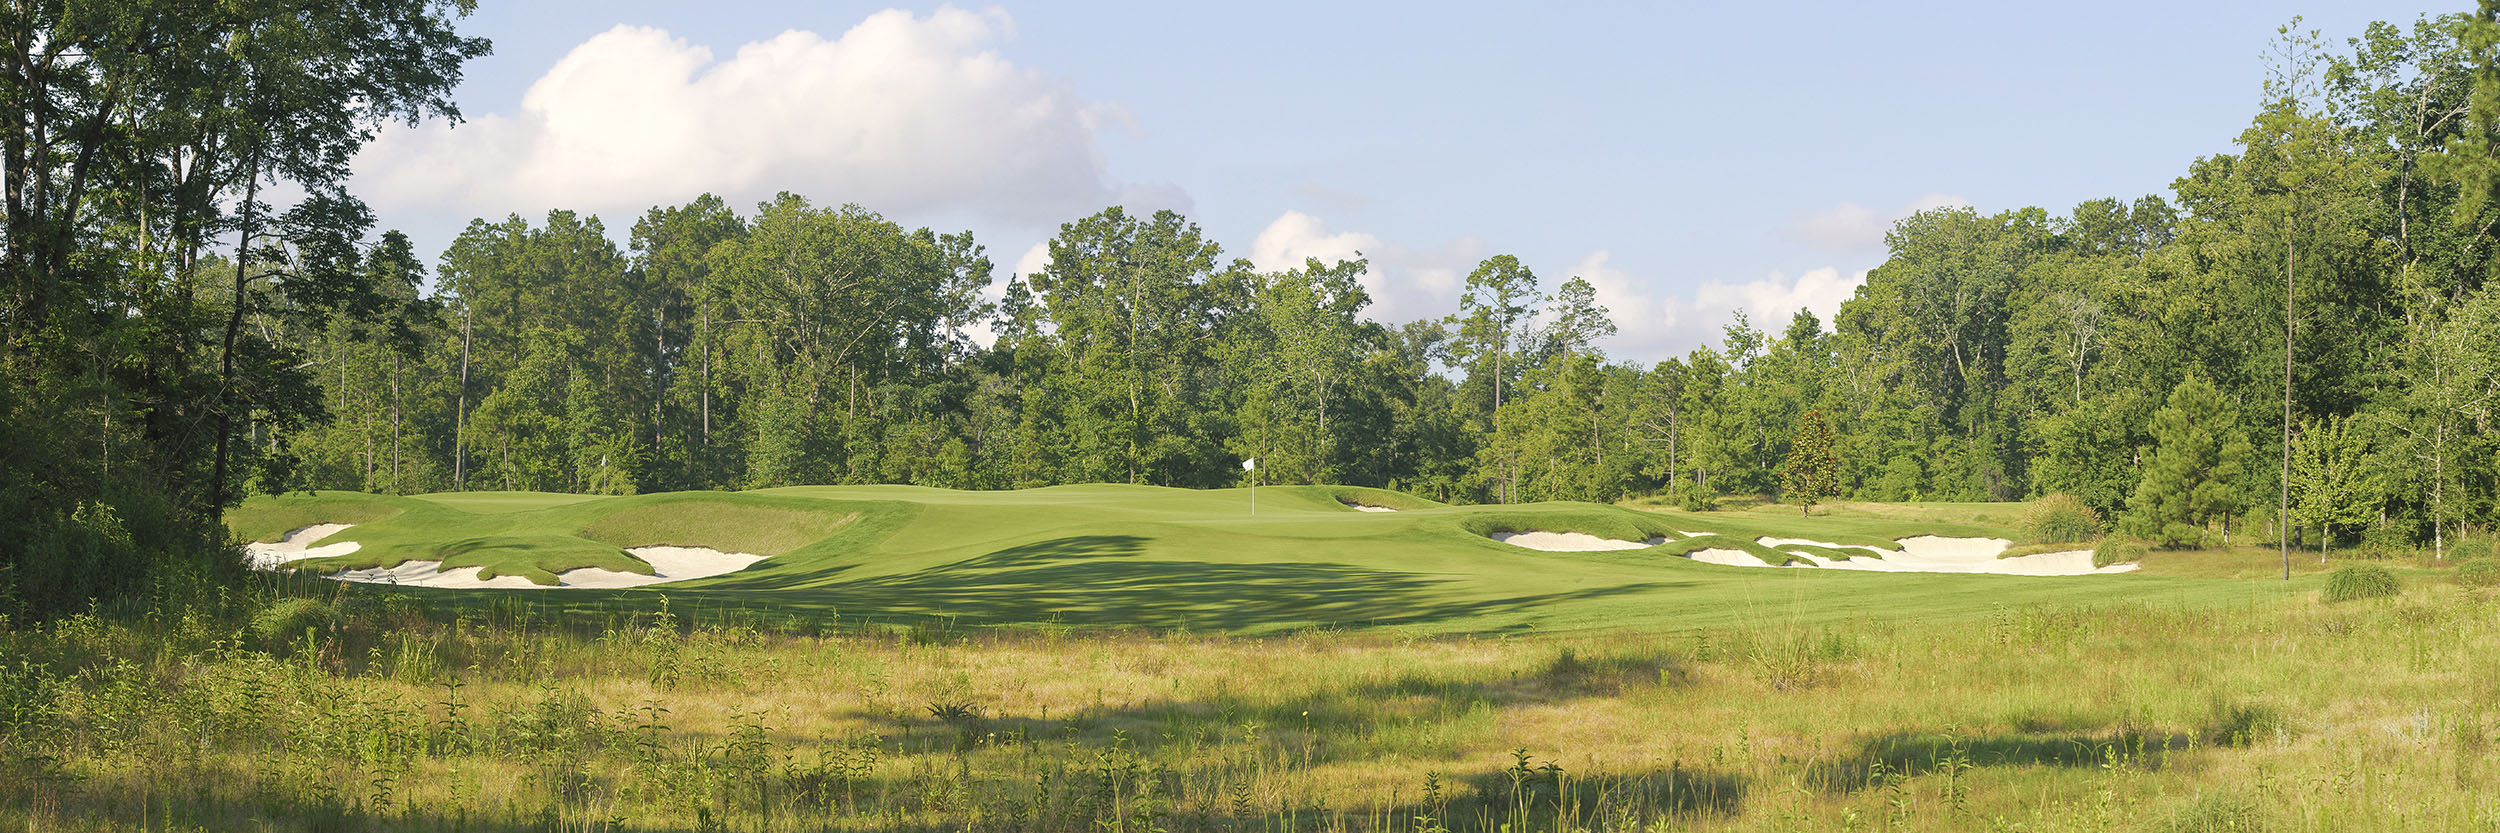 Whispering Pines Needler Course No 8